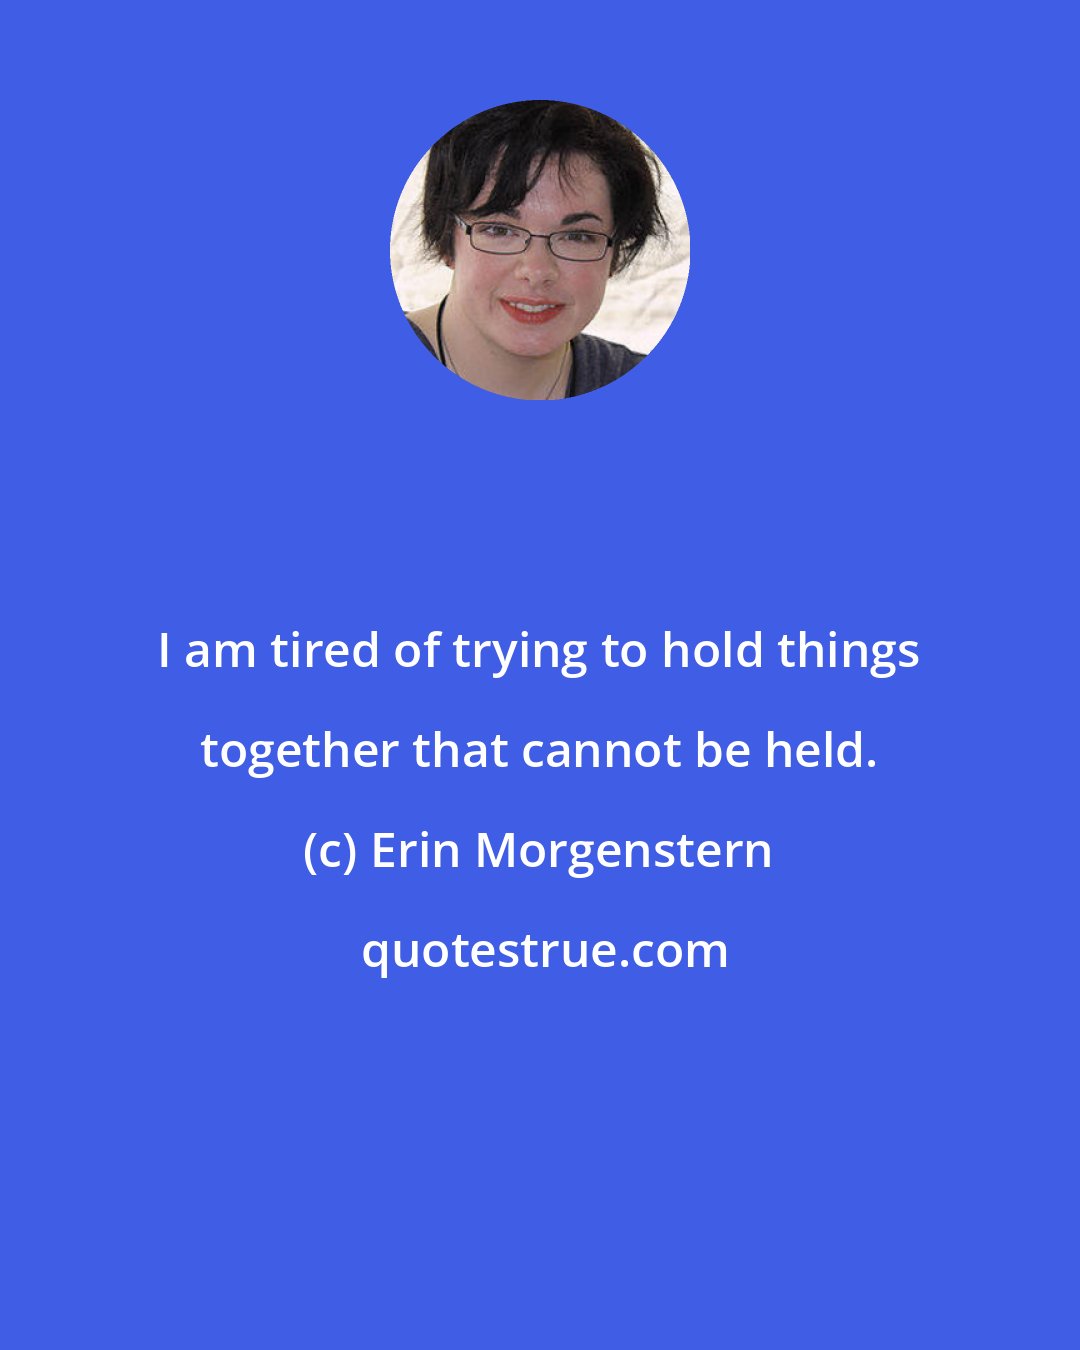 Erin Morgenstern: I am tired of trying to hold things together that cannot be held.